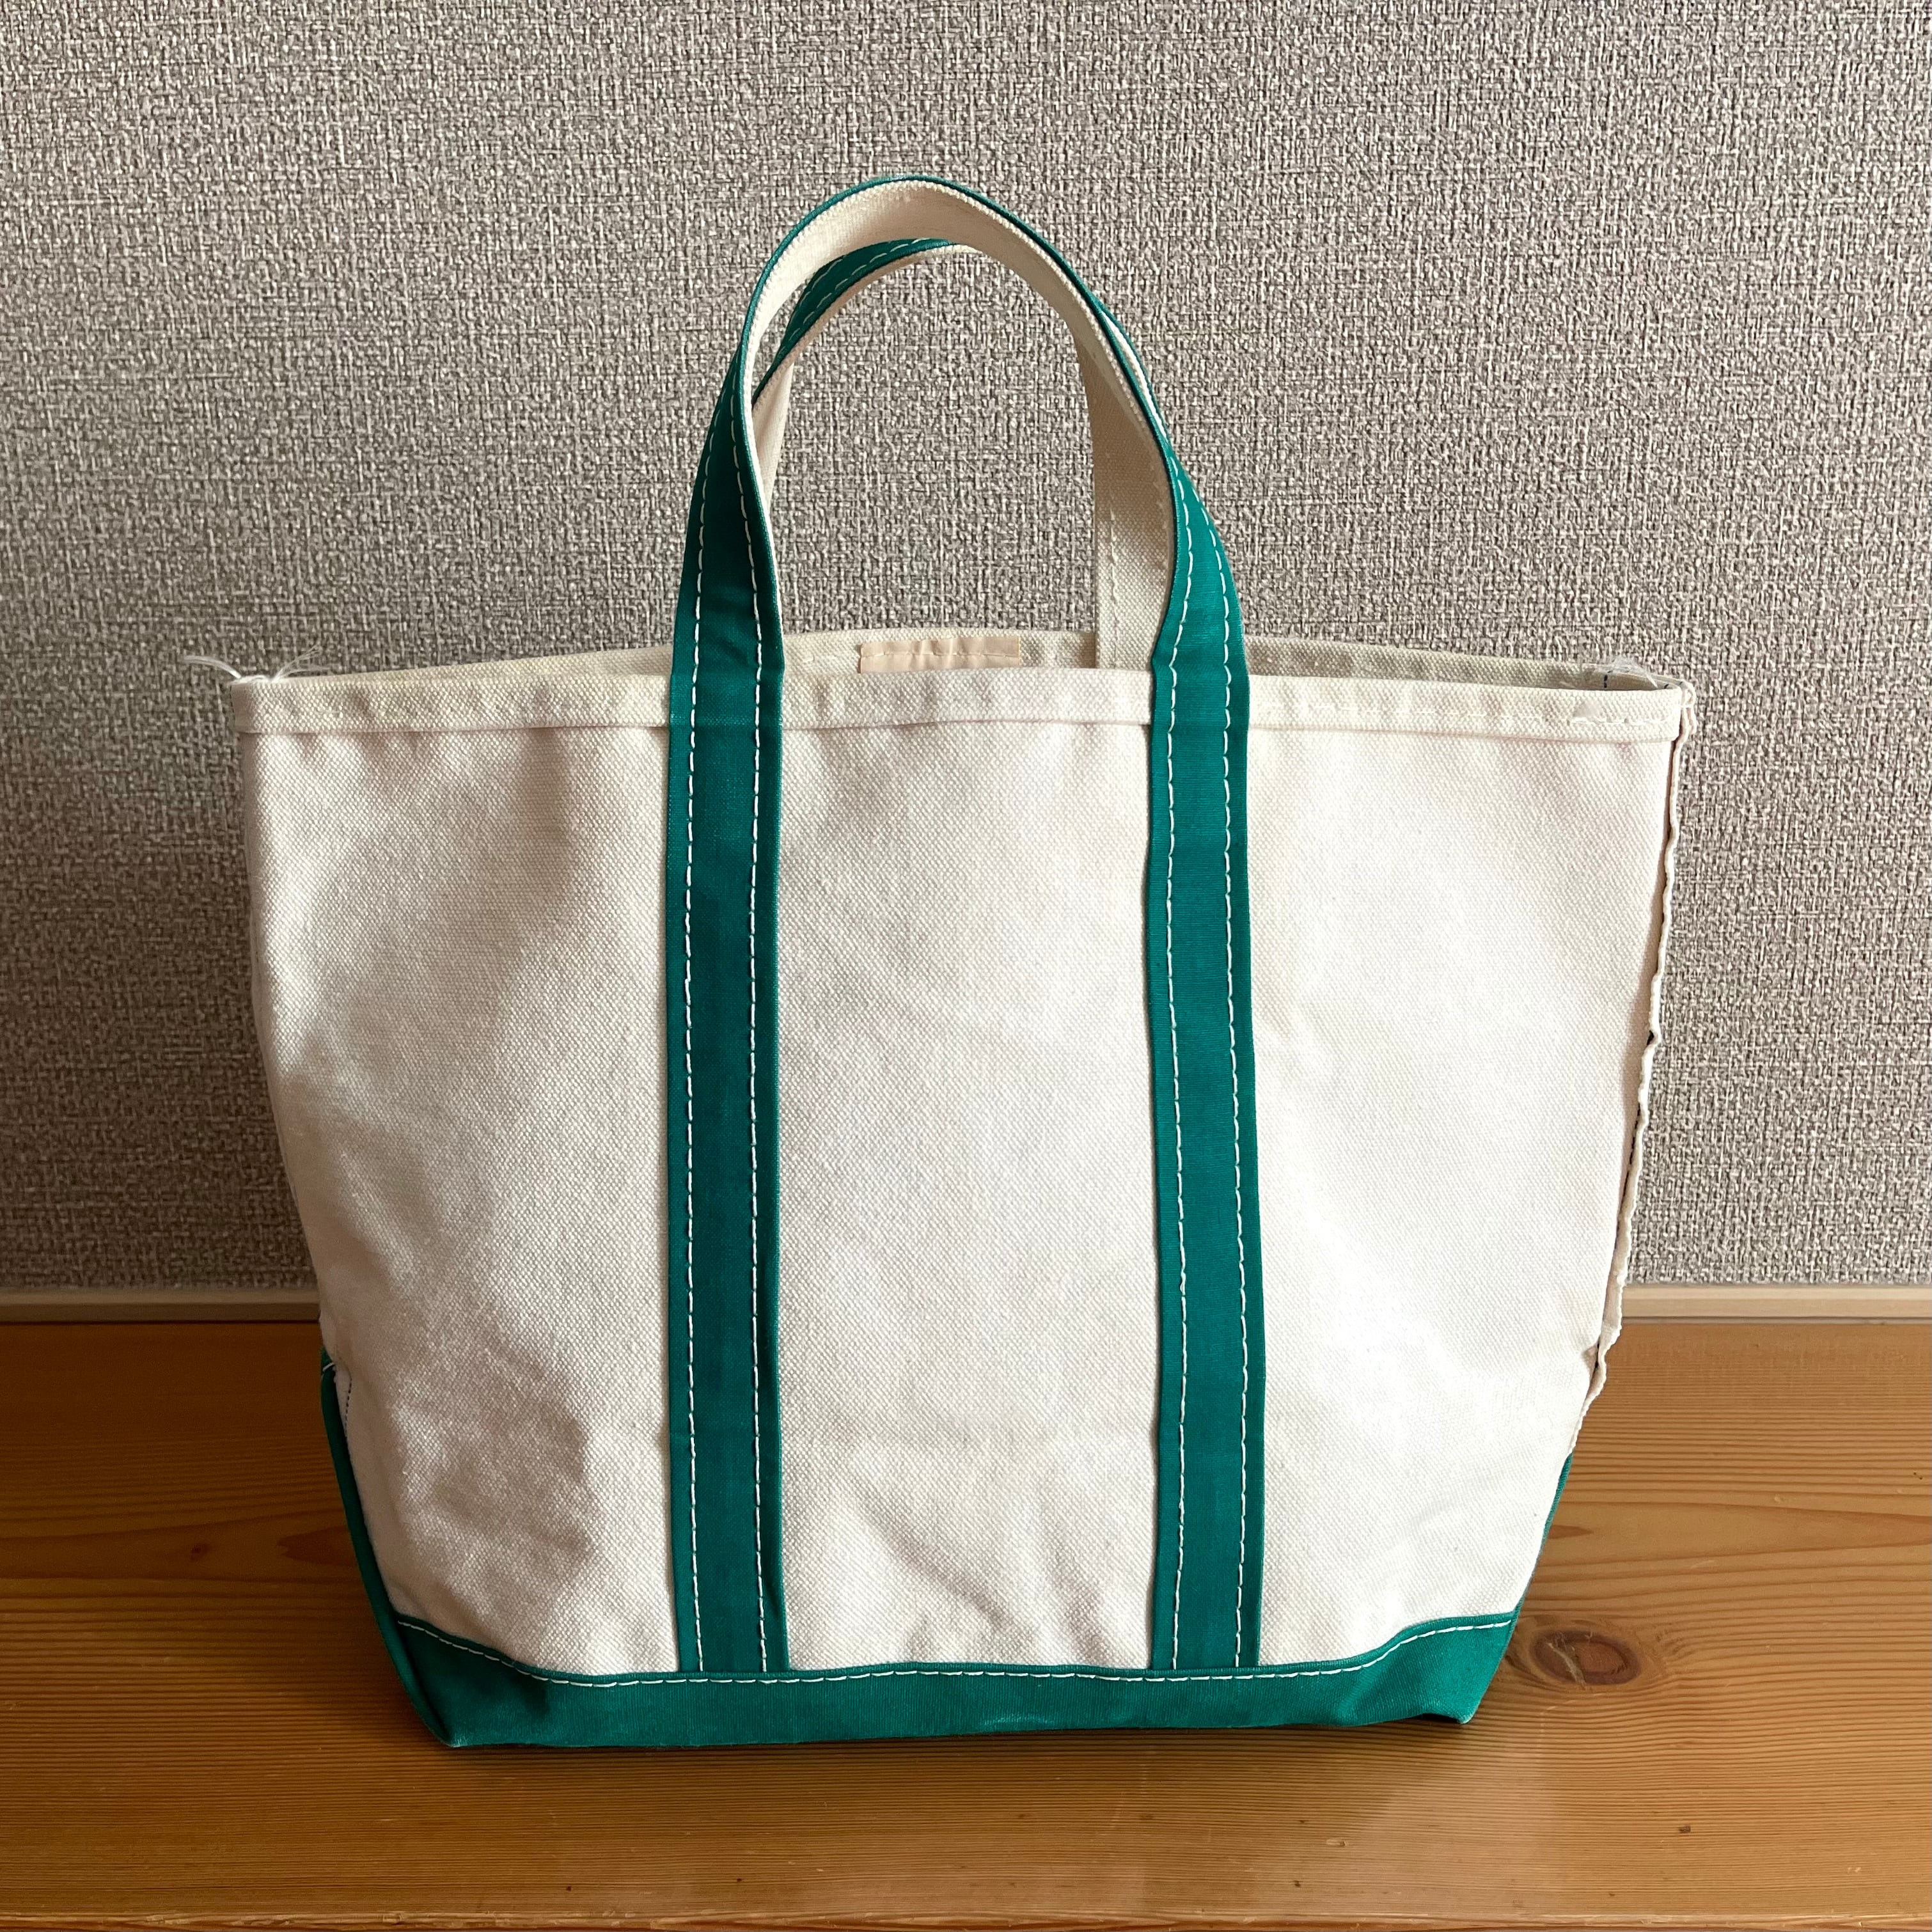 Msize！ 】80s L.L.bean トートバッグ 2トーンタグ BOAT AND TOTE 